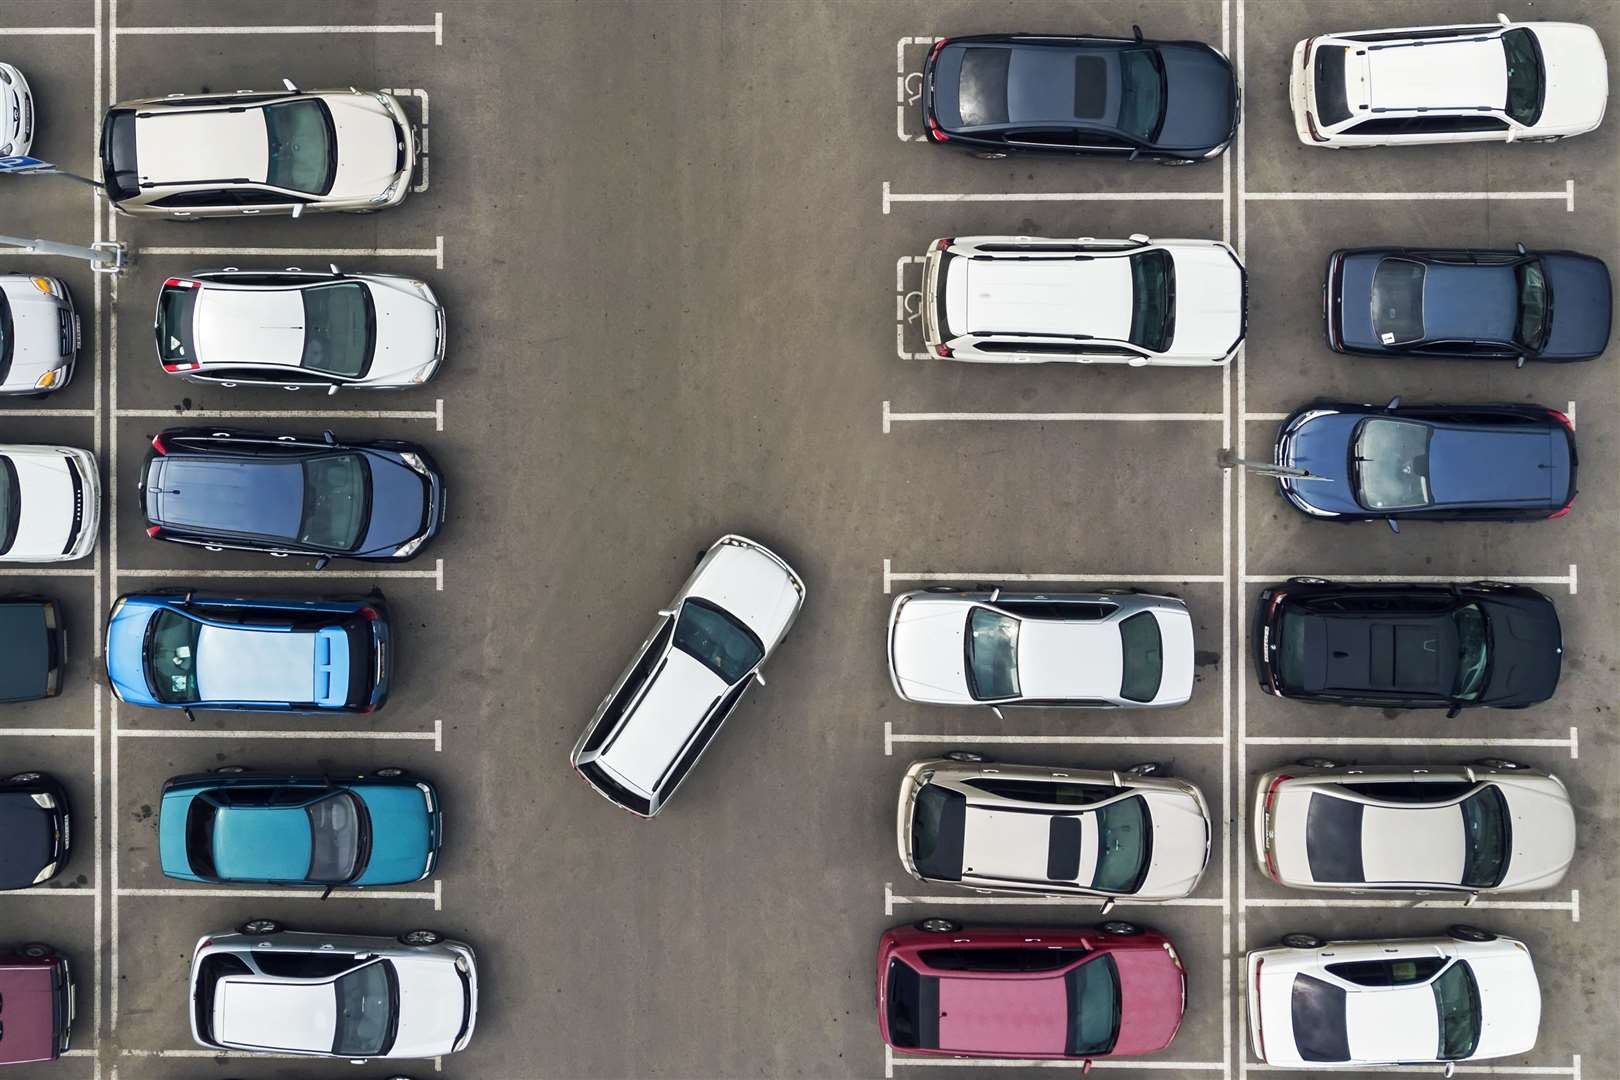 Employers could be charged for providing parking spaces.